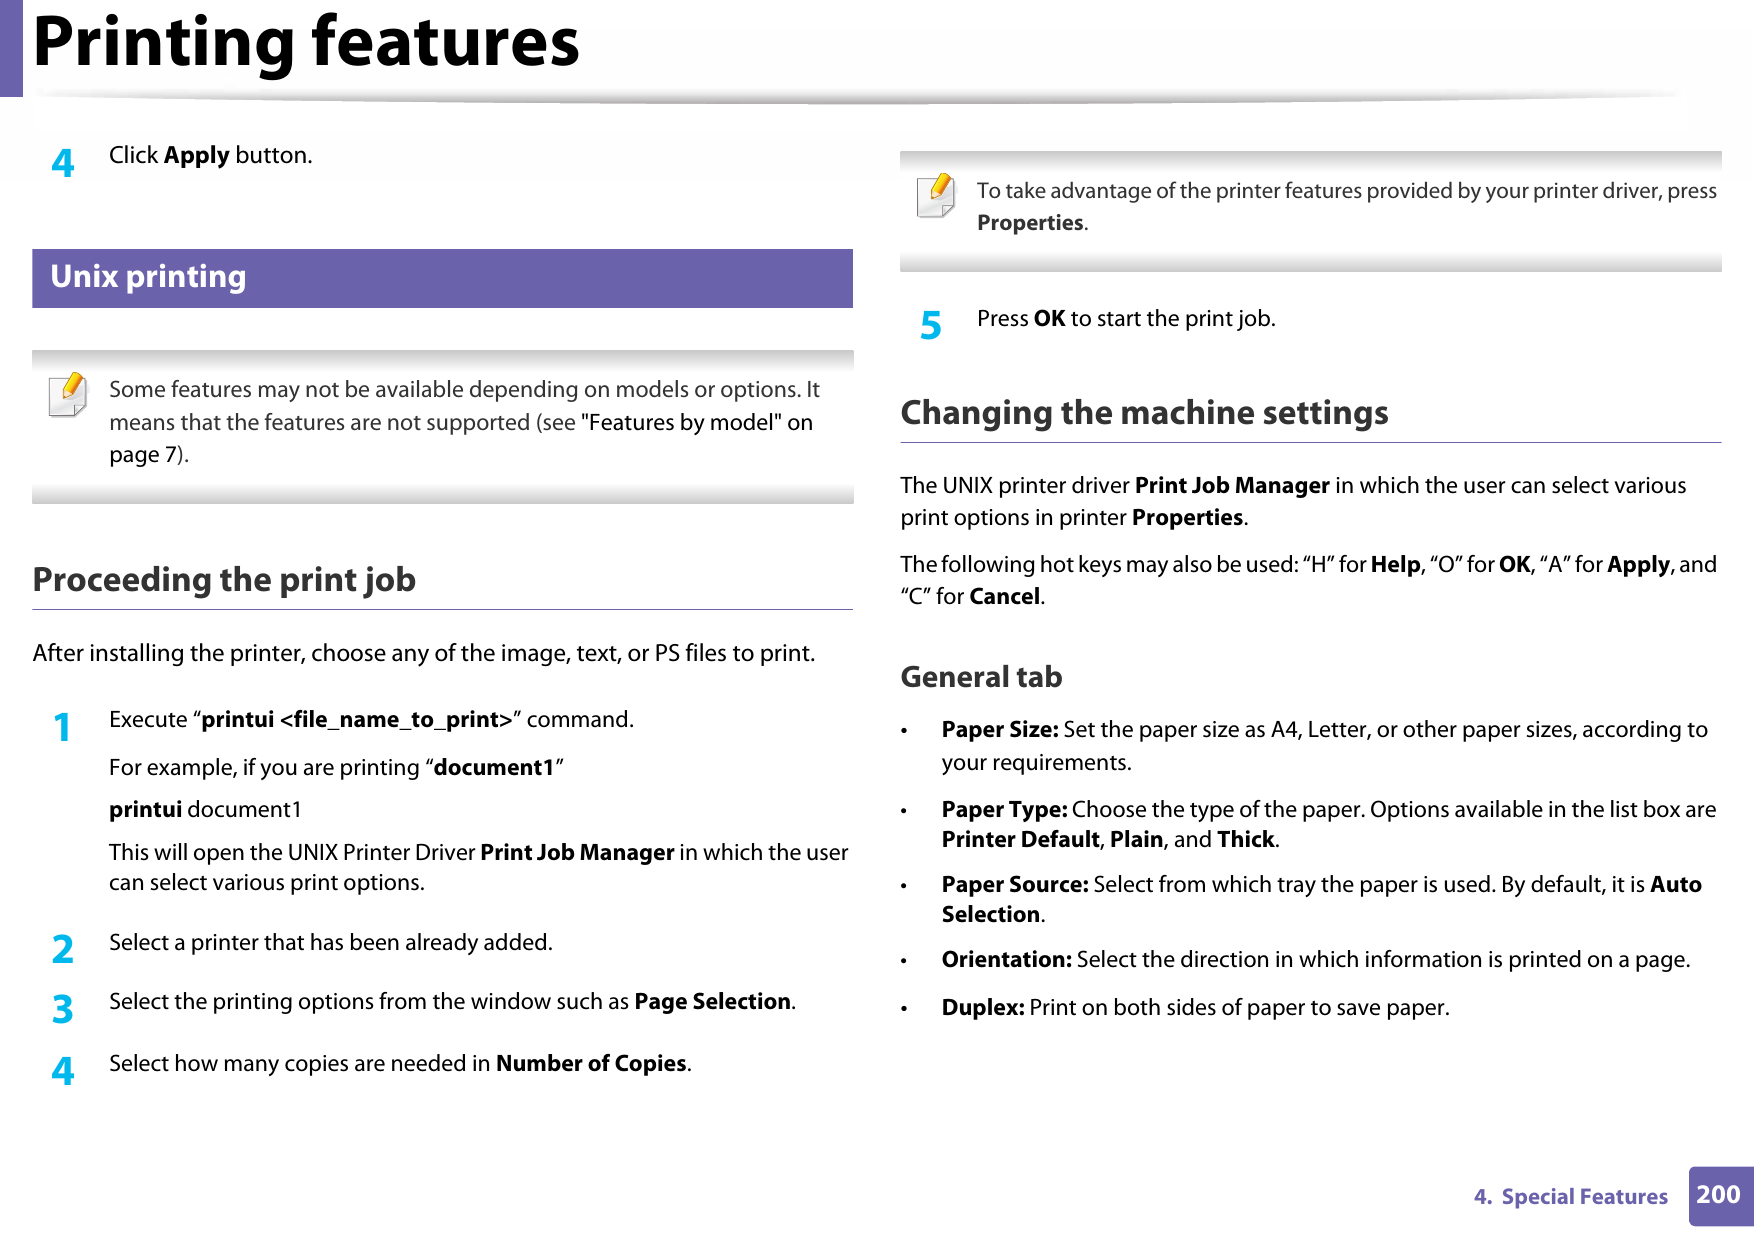 Printing features2004.  Special Features4  Click Apply button.9 Unix printing  Some features may not be available depending on models or options. It means that the features are not supported (see &quot;Features by model&quot; on page 7). Proceeding the print jobAfter installing the printer, choose any of the image, text, or PS files to print.1Execute “printui &lt;file_name_to_print&gt;” command.For example, if you are printing “document1”printui document1This will open the UNIX Printer Driver Print Job Manager in which the user can select various print options.2  Select a printer that has been already added.3  Select the printing options from the window such as Page Selection.4  Select how many copies are needed in Number of Copies. To take advantage of the printer features provided by your printer driver, press Properties. 5  Press OK to start the print job.Changing the machine settingsThe UNIX printer driver Print Job Manager in which the user can select various print options in printer Properties.The following hot keys may also be used: “H” for Help, “O” for OK, “A” for Apply, and “C” for Cancel.General tab•Paper Size: Set the paper size as A4, Letter, or other paper sizes, according to your requirements.•Paper Type: Choose the type of the paper. Options available in the list box are Printer Default, Plain, and Thick.•Paper Source: Select from which tray the paper is used. By default, it is Auto Selection.•Orientation: Select the direction in which information is printed on a page.•Duplex: Print on both sides of paper to save paper.